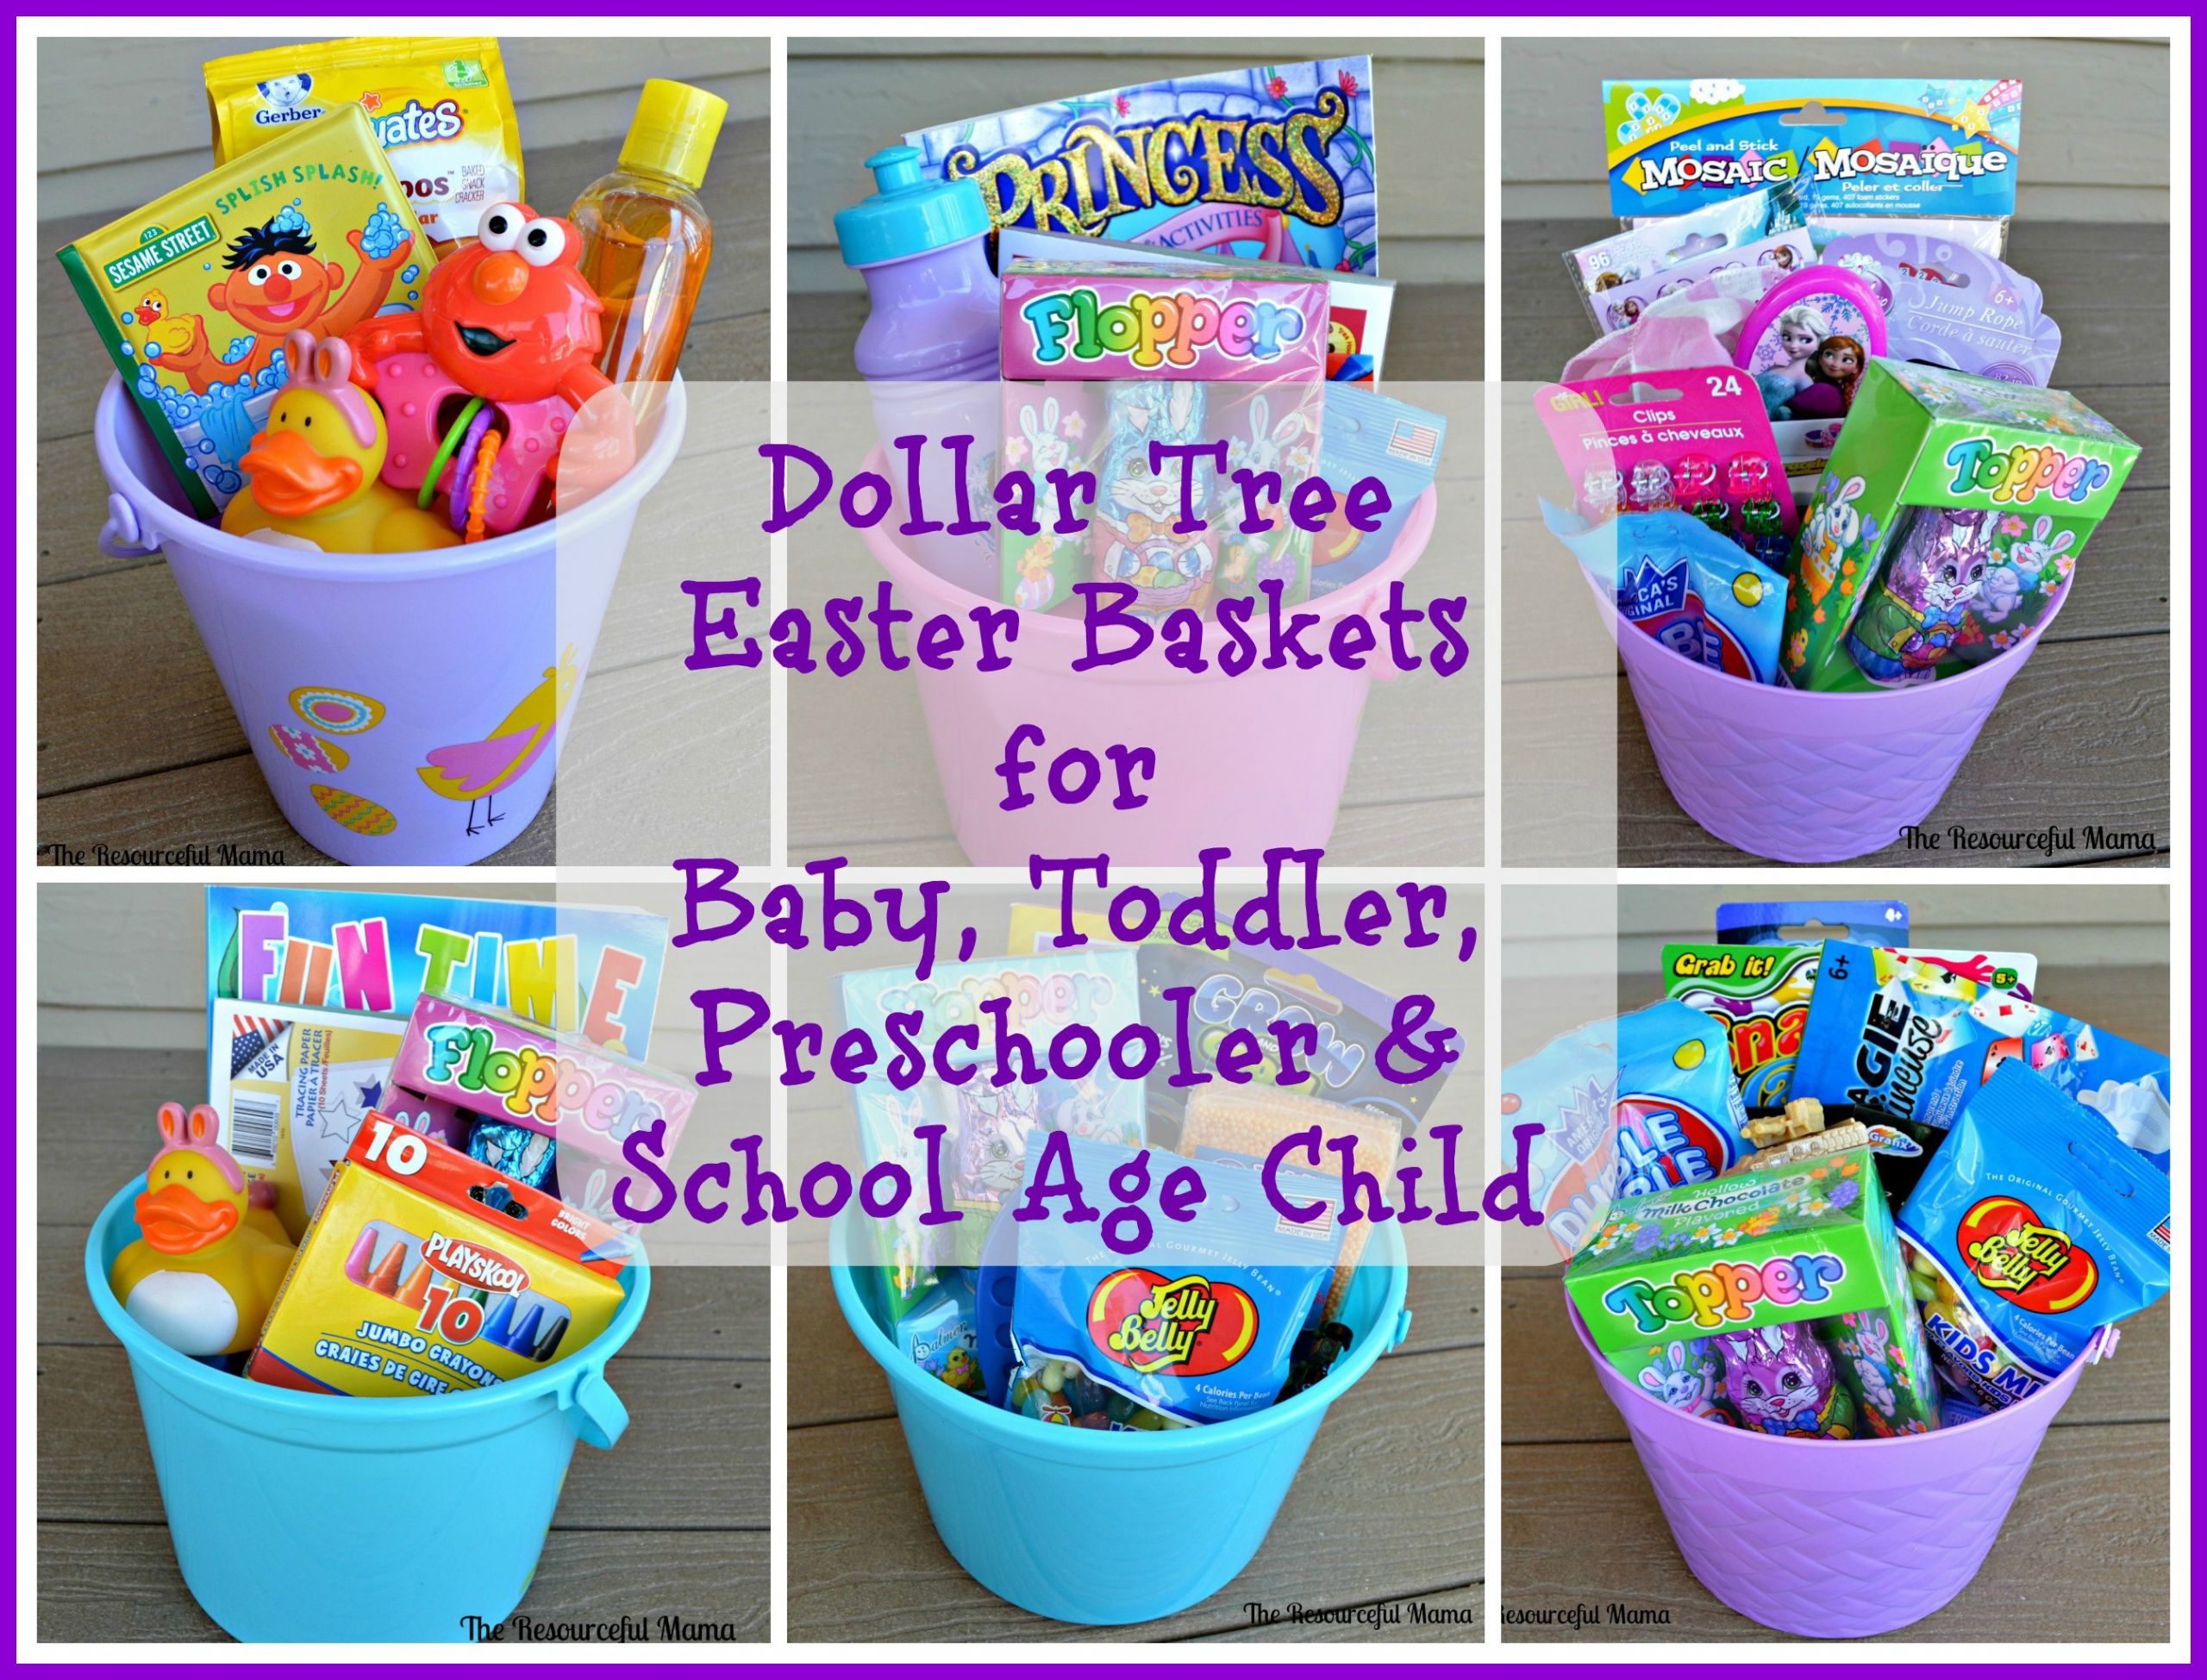 Easter Basket Ideas For 12 Year Old Boy
 Dollar Tree Easter Baskets The Resourceful Mama